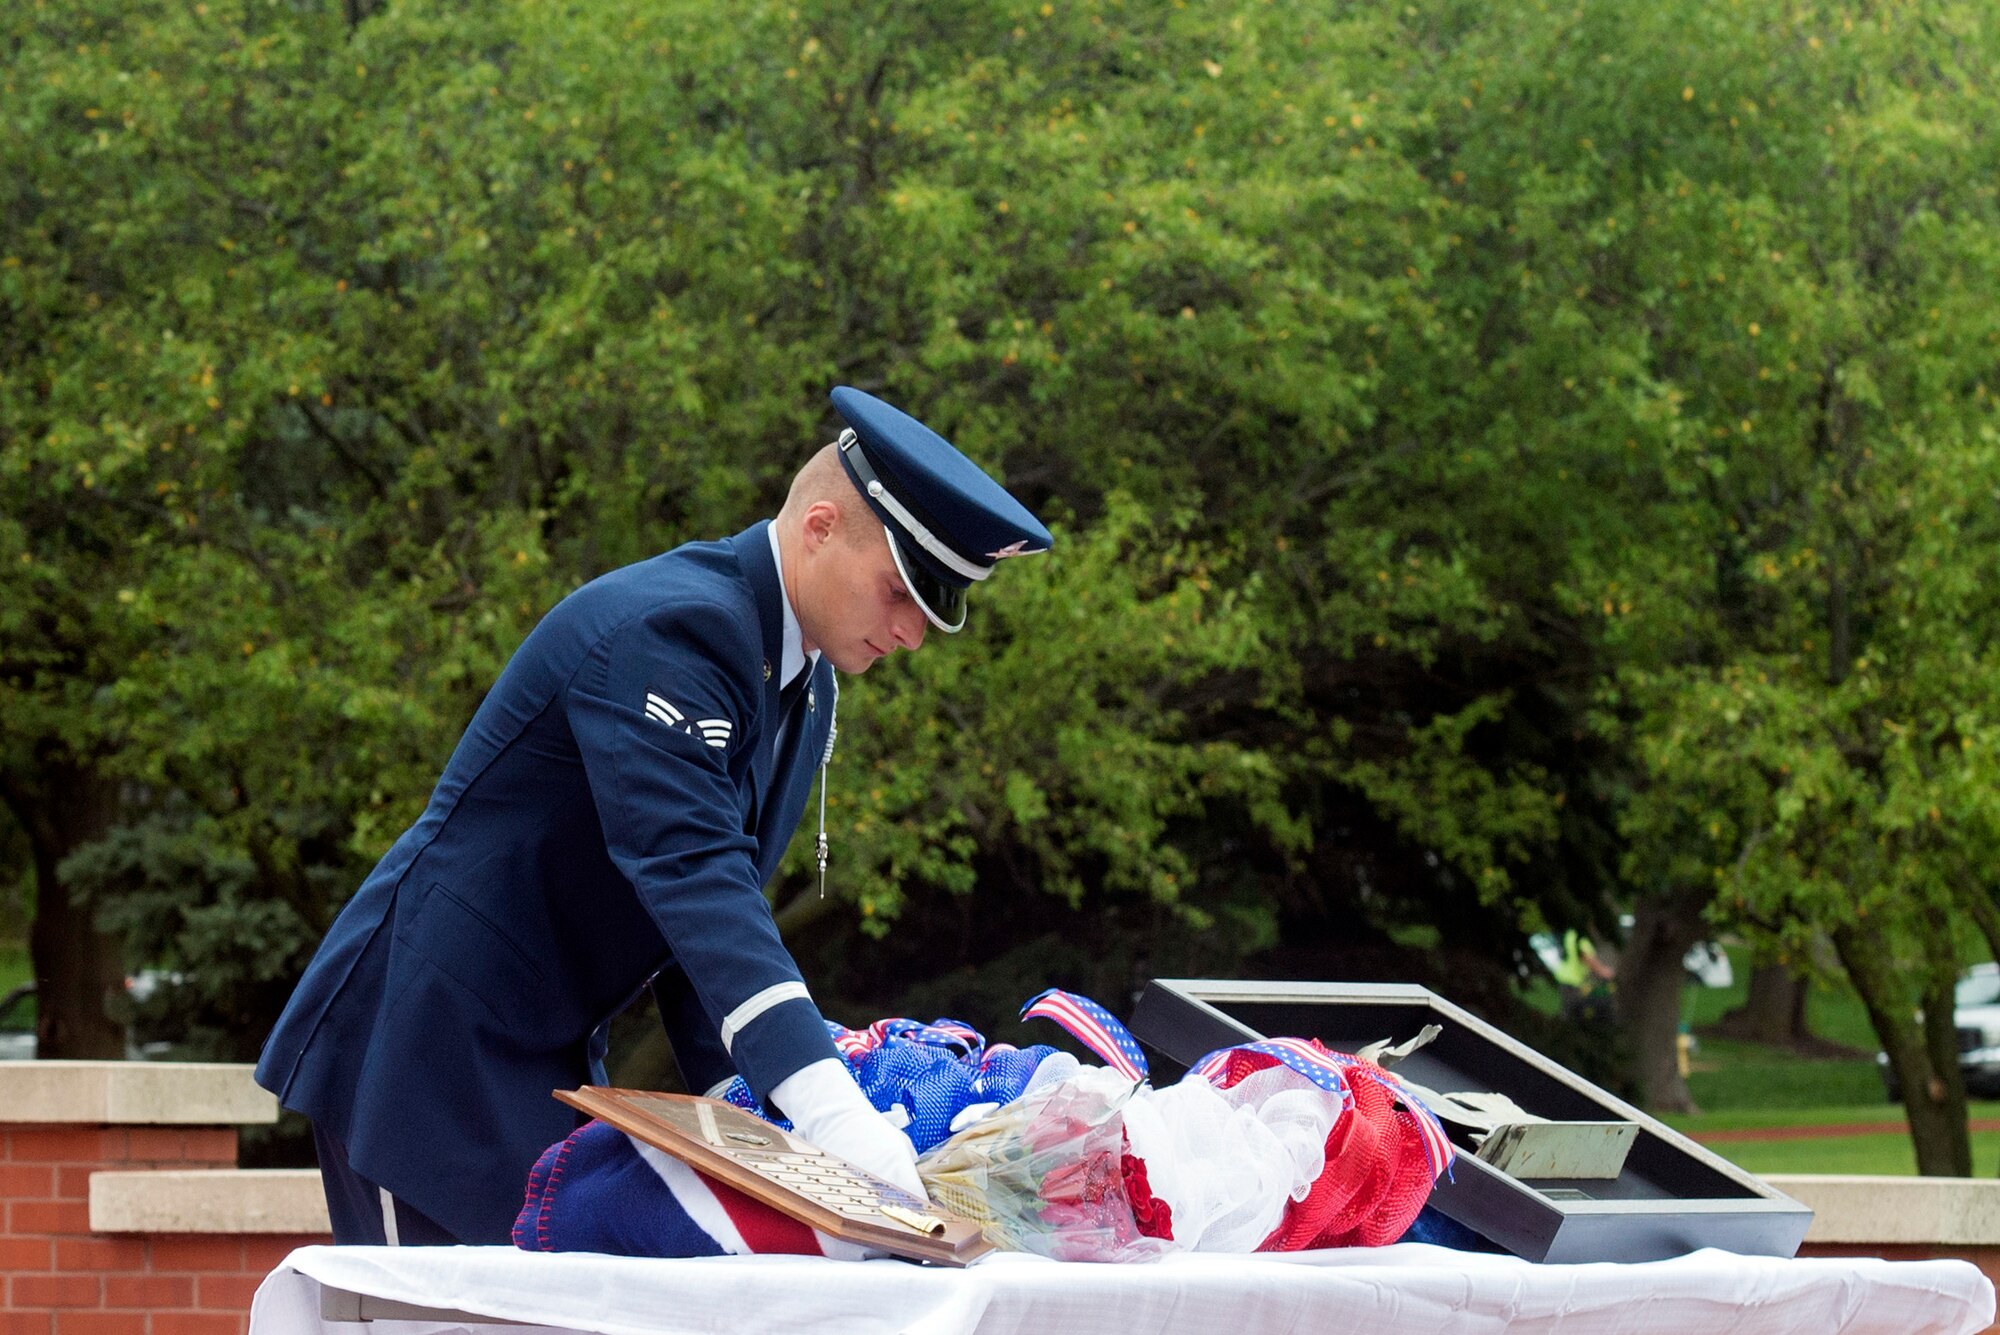 Senior Airman Zachary, Offutt Air Force Base Honor Guard member, lays a wreath and roses next to a piece of C-130 wreckage from 60528, an aircraft which was shot down in the Cold War, during a remembrance ceremony held Aug. 30, 2018, at Offutt Air Force Base, Nebraska. The ceremony was attended by members of the 97th Intelligence Squadron, the Prop Wash Gang, a group of retired ISR operators, family members and fellow wingman to the fallen. (U.S. Air Force photo by L. Cunningham)